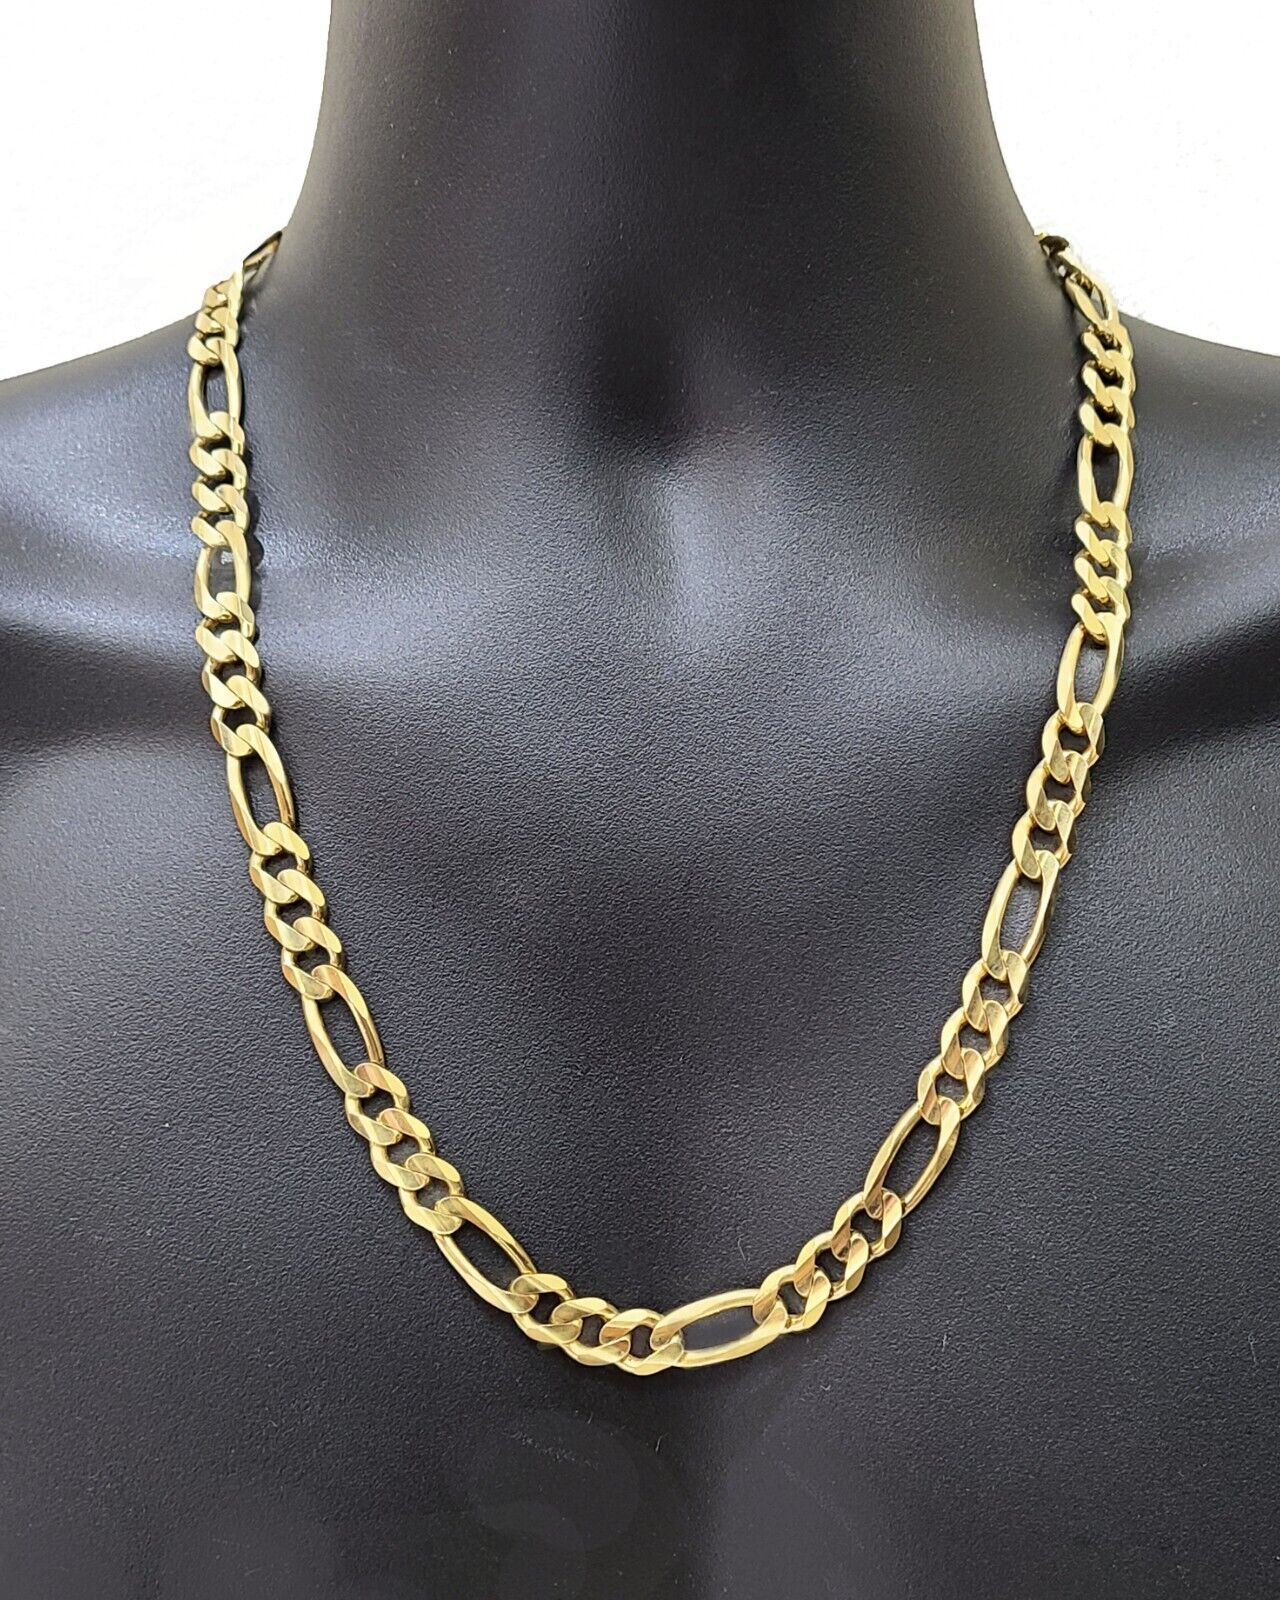 Necklace 18Kt Yellow Gold Filled Solid Curb Link Pendant Chain 65 cm : 26  inch | eBay